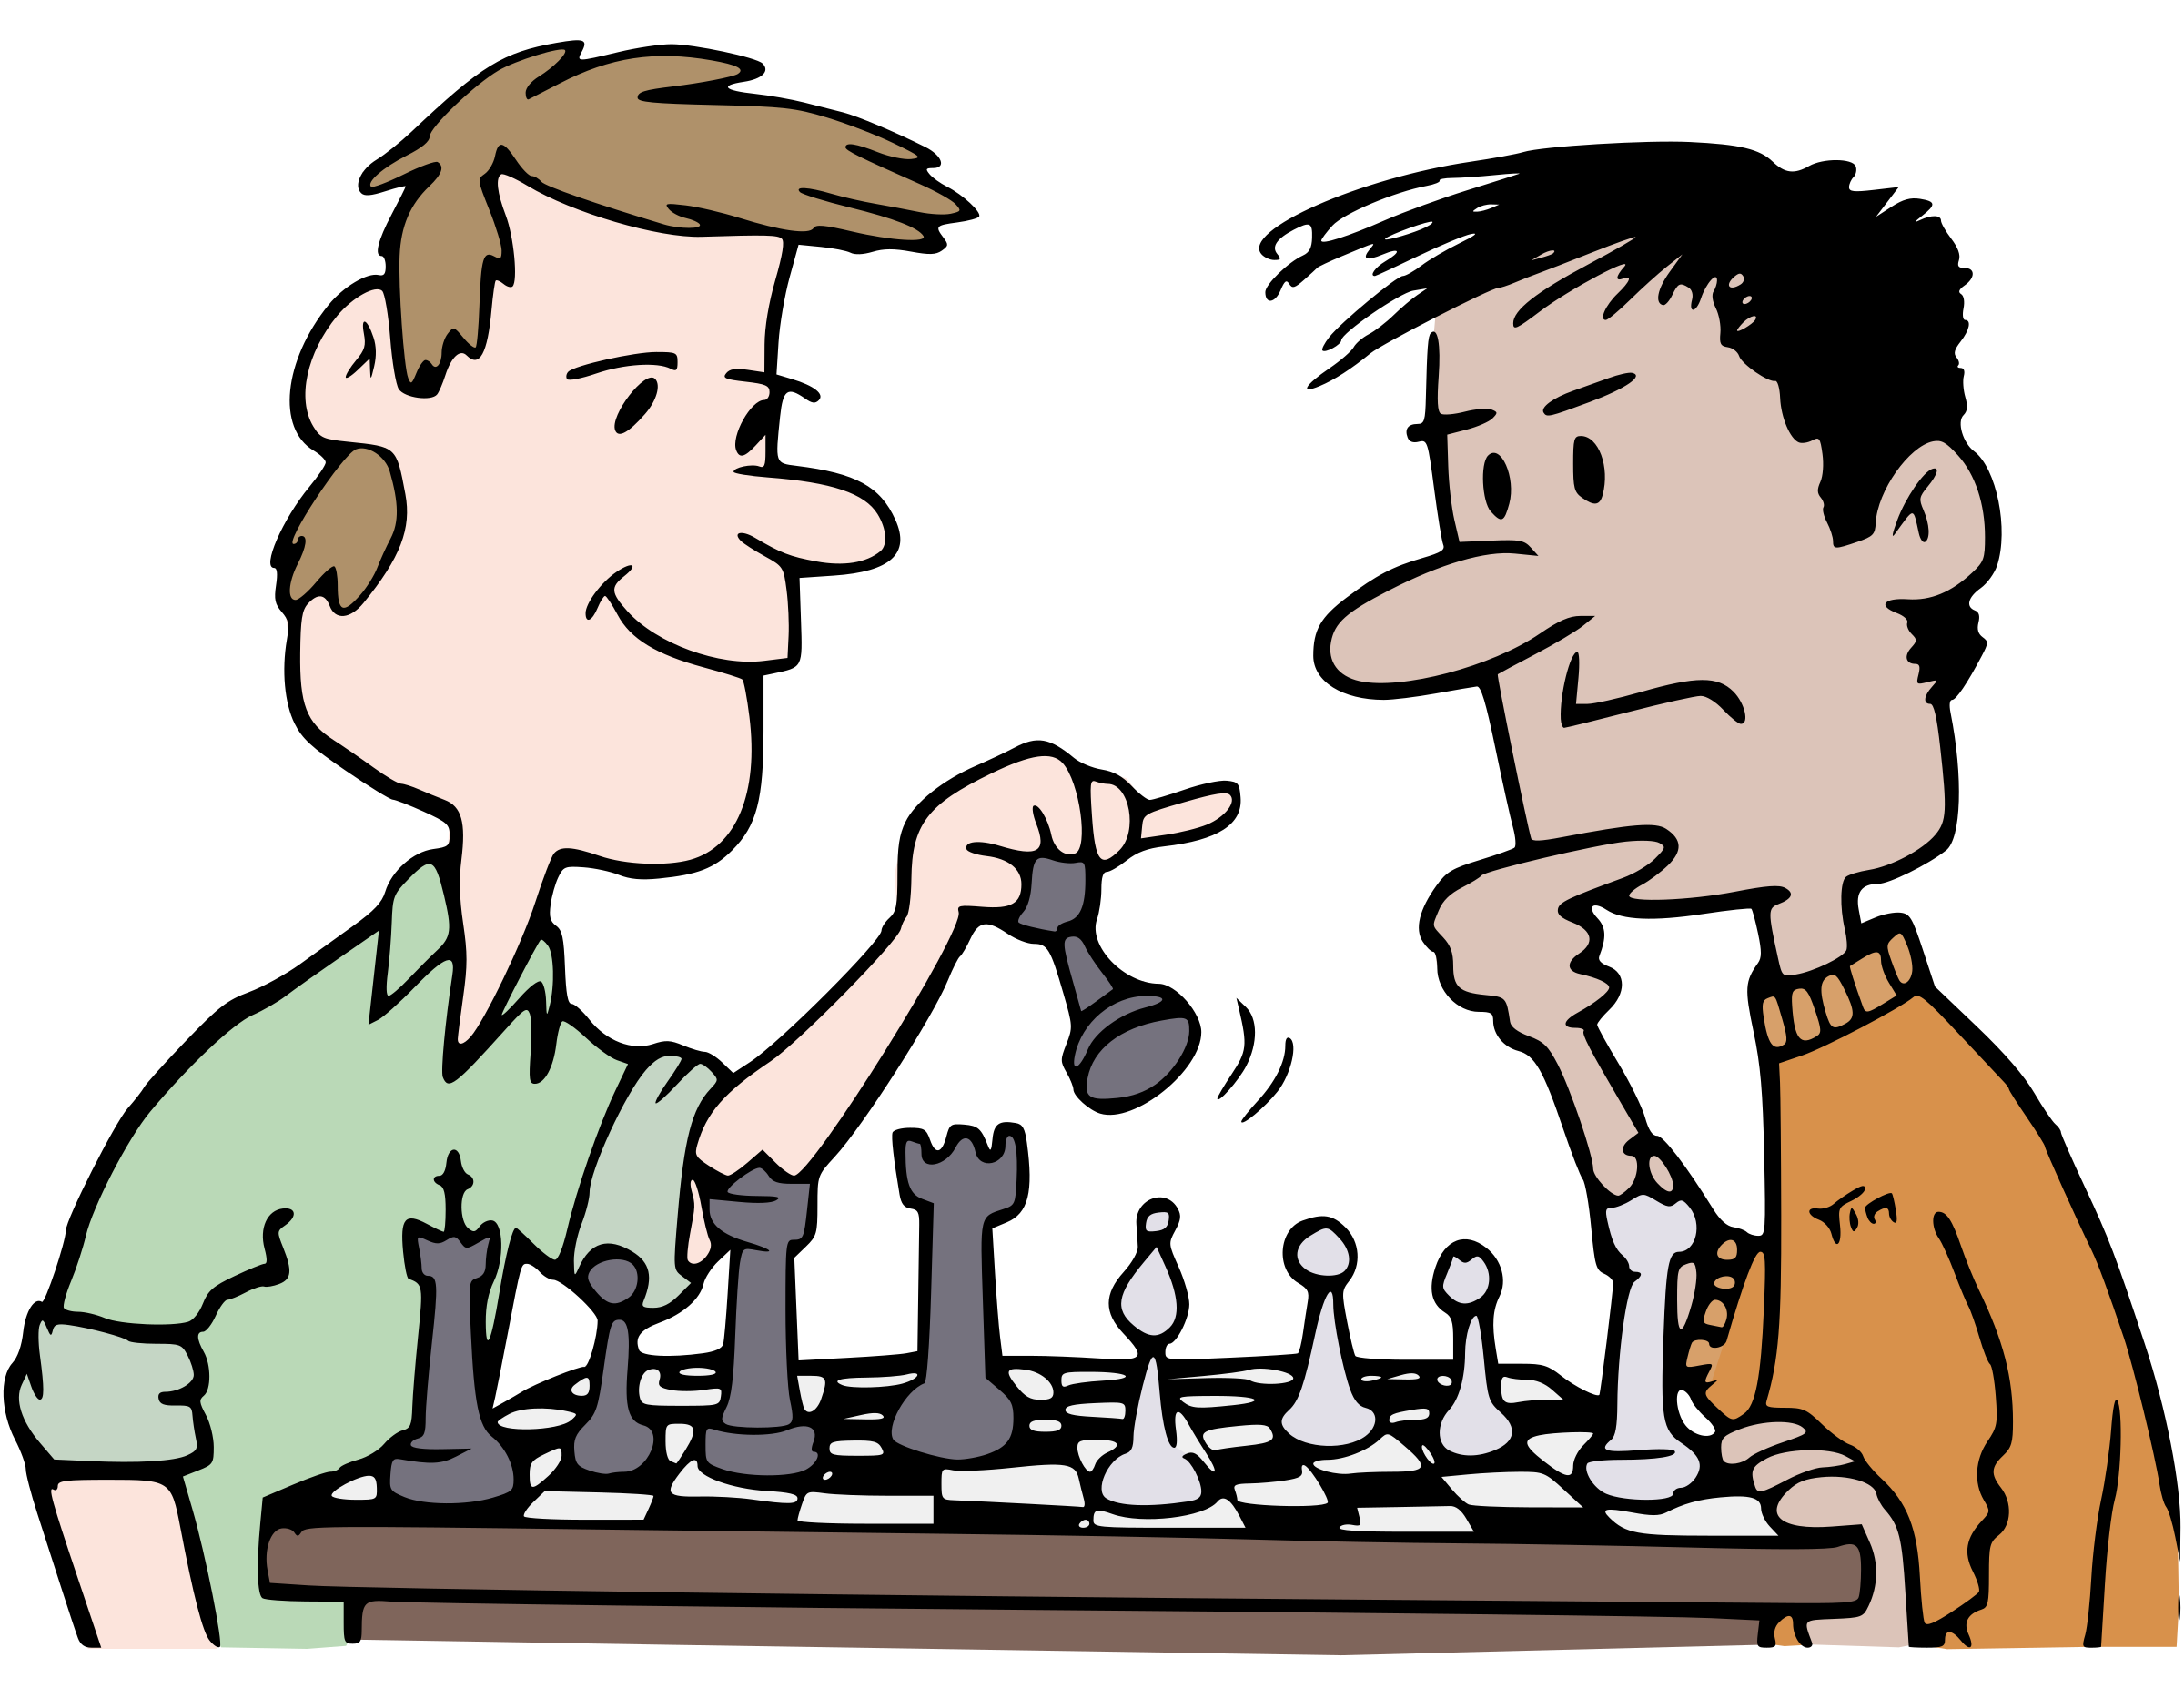 chess clipart 2